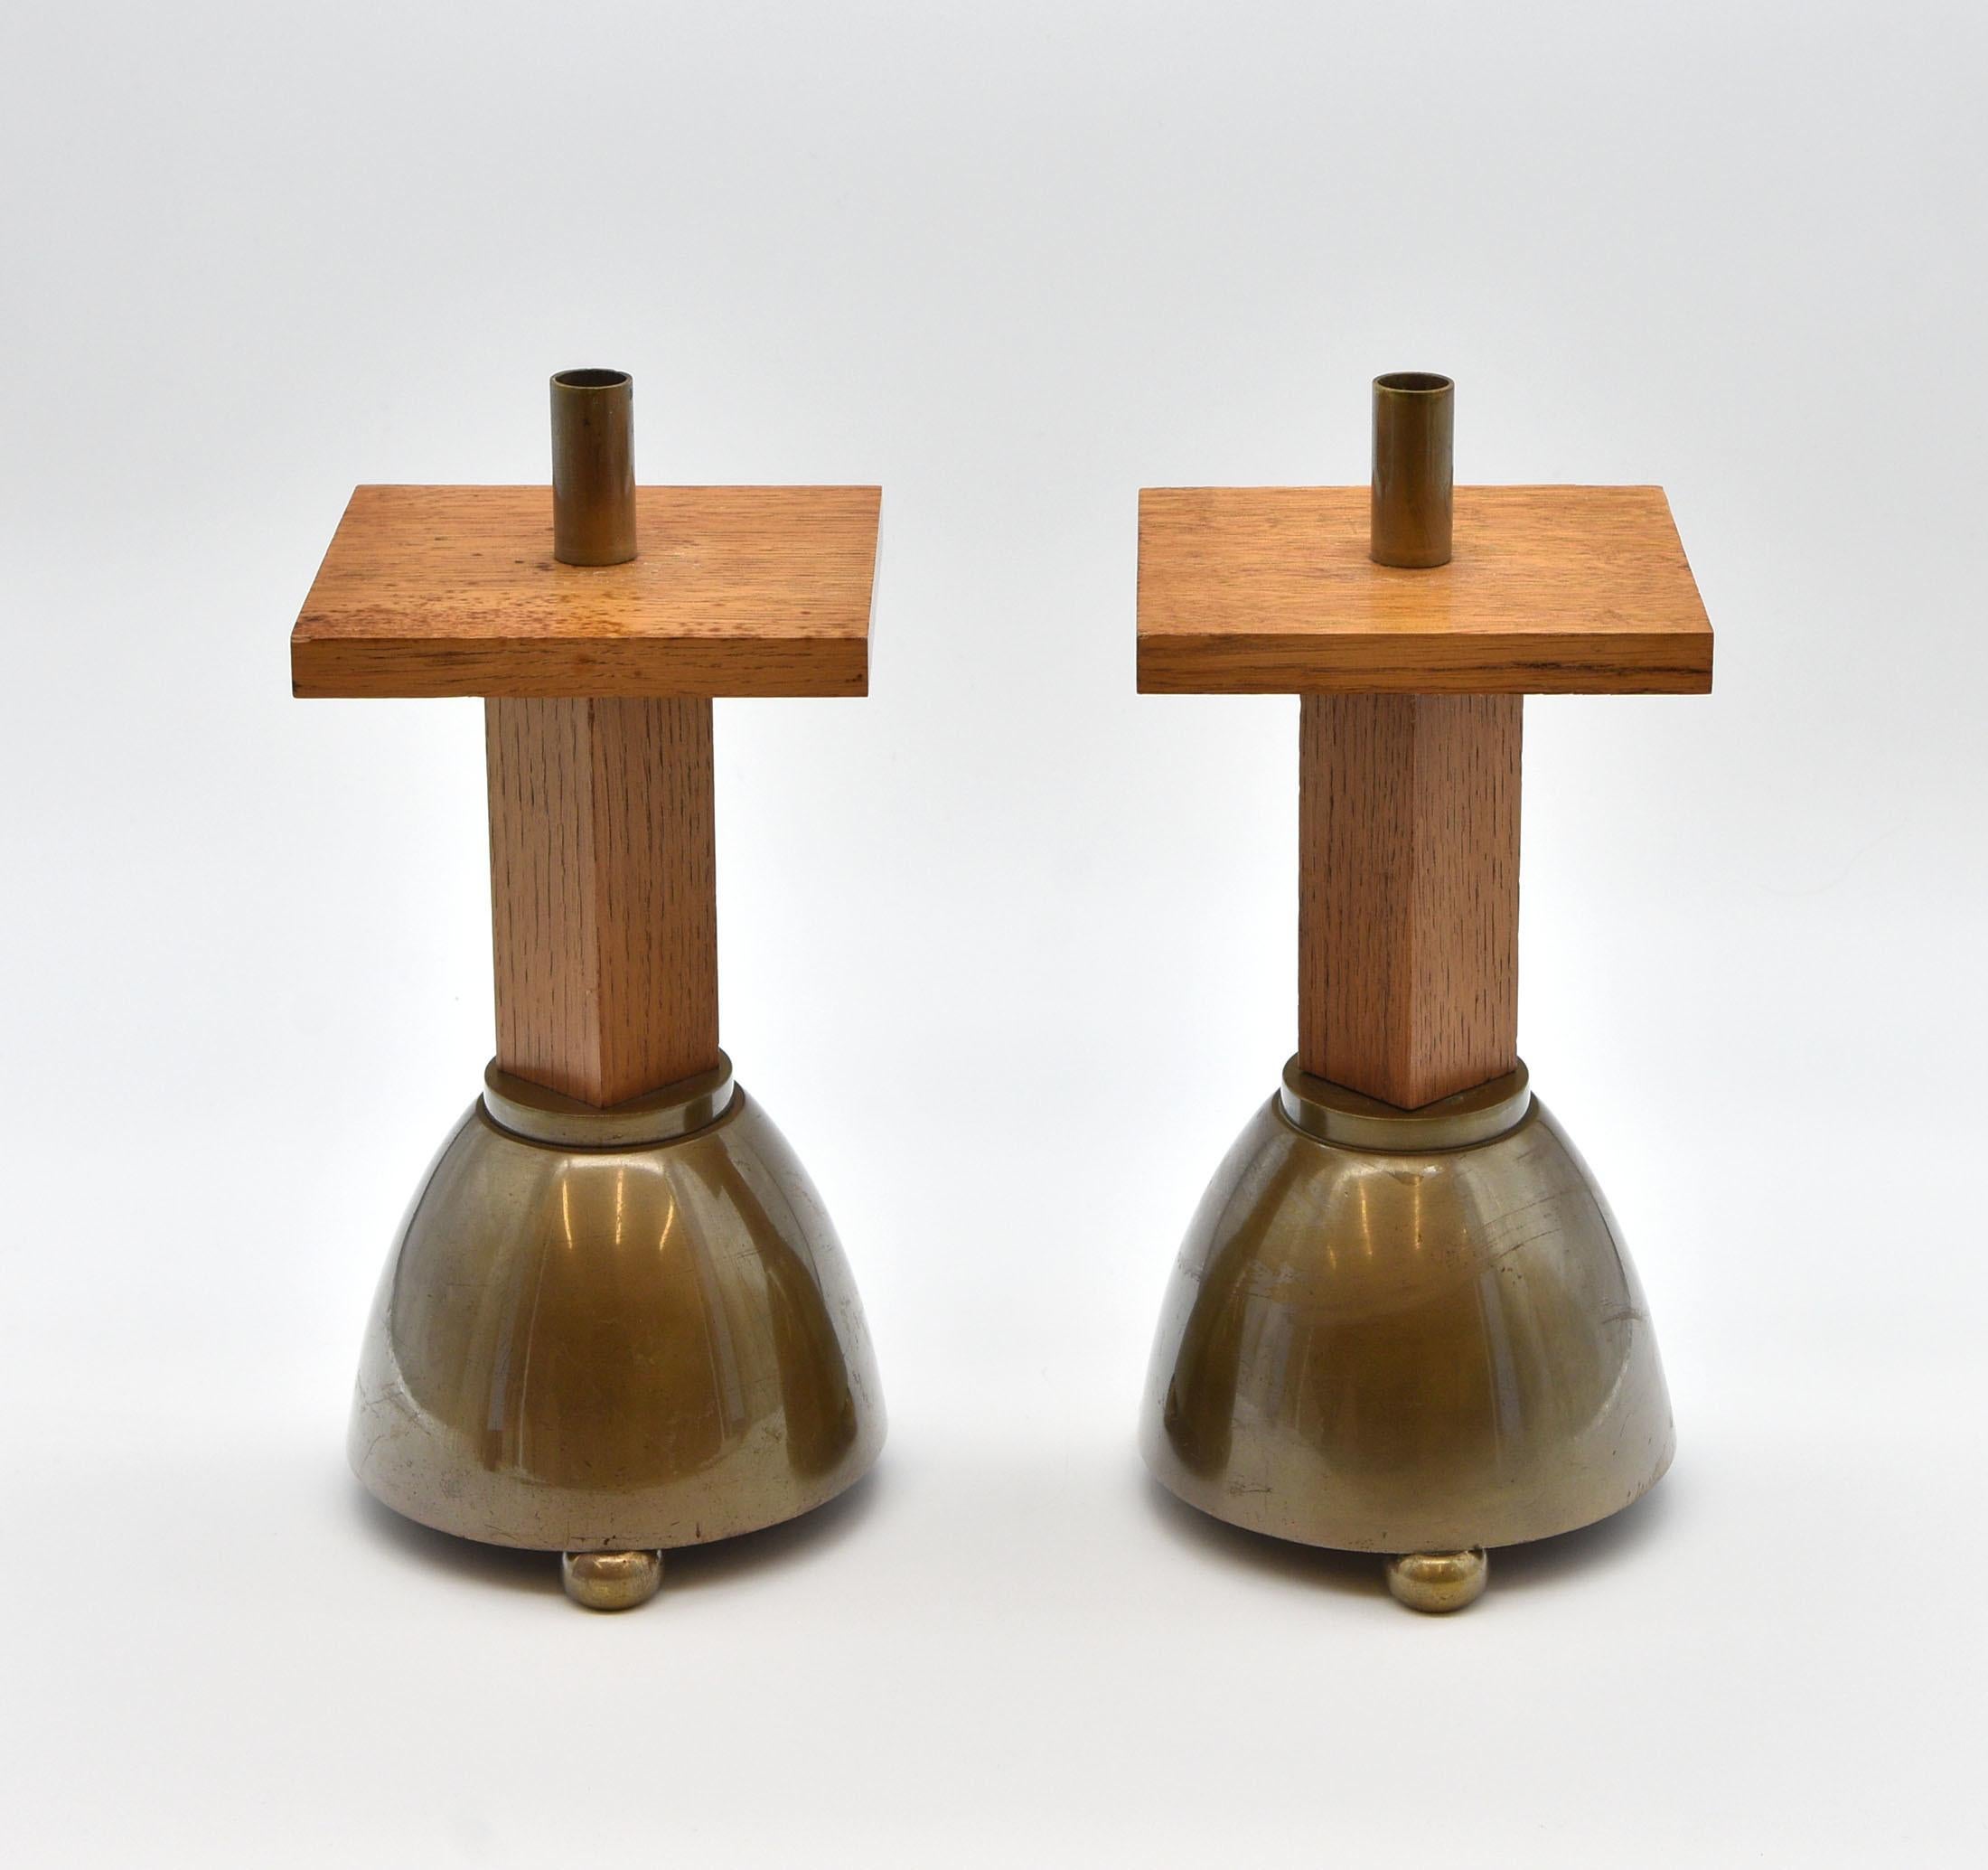 A pair of brass and solid oak candlesticks in a Brutalist manner. Circa 1970.

There are a few signs of use to the finish expected with age and use.